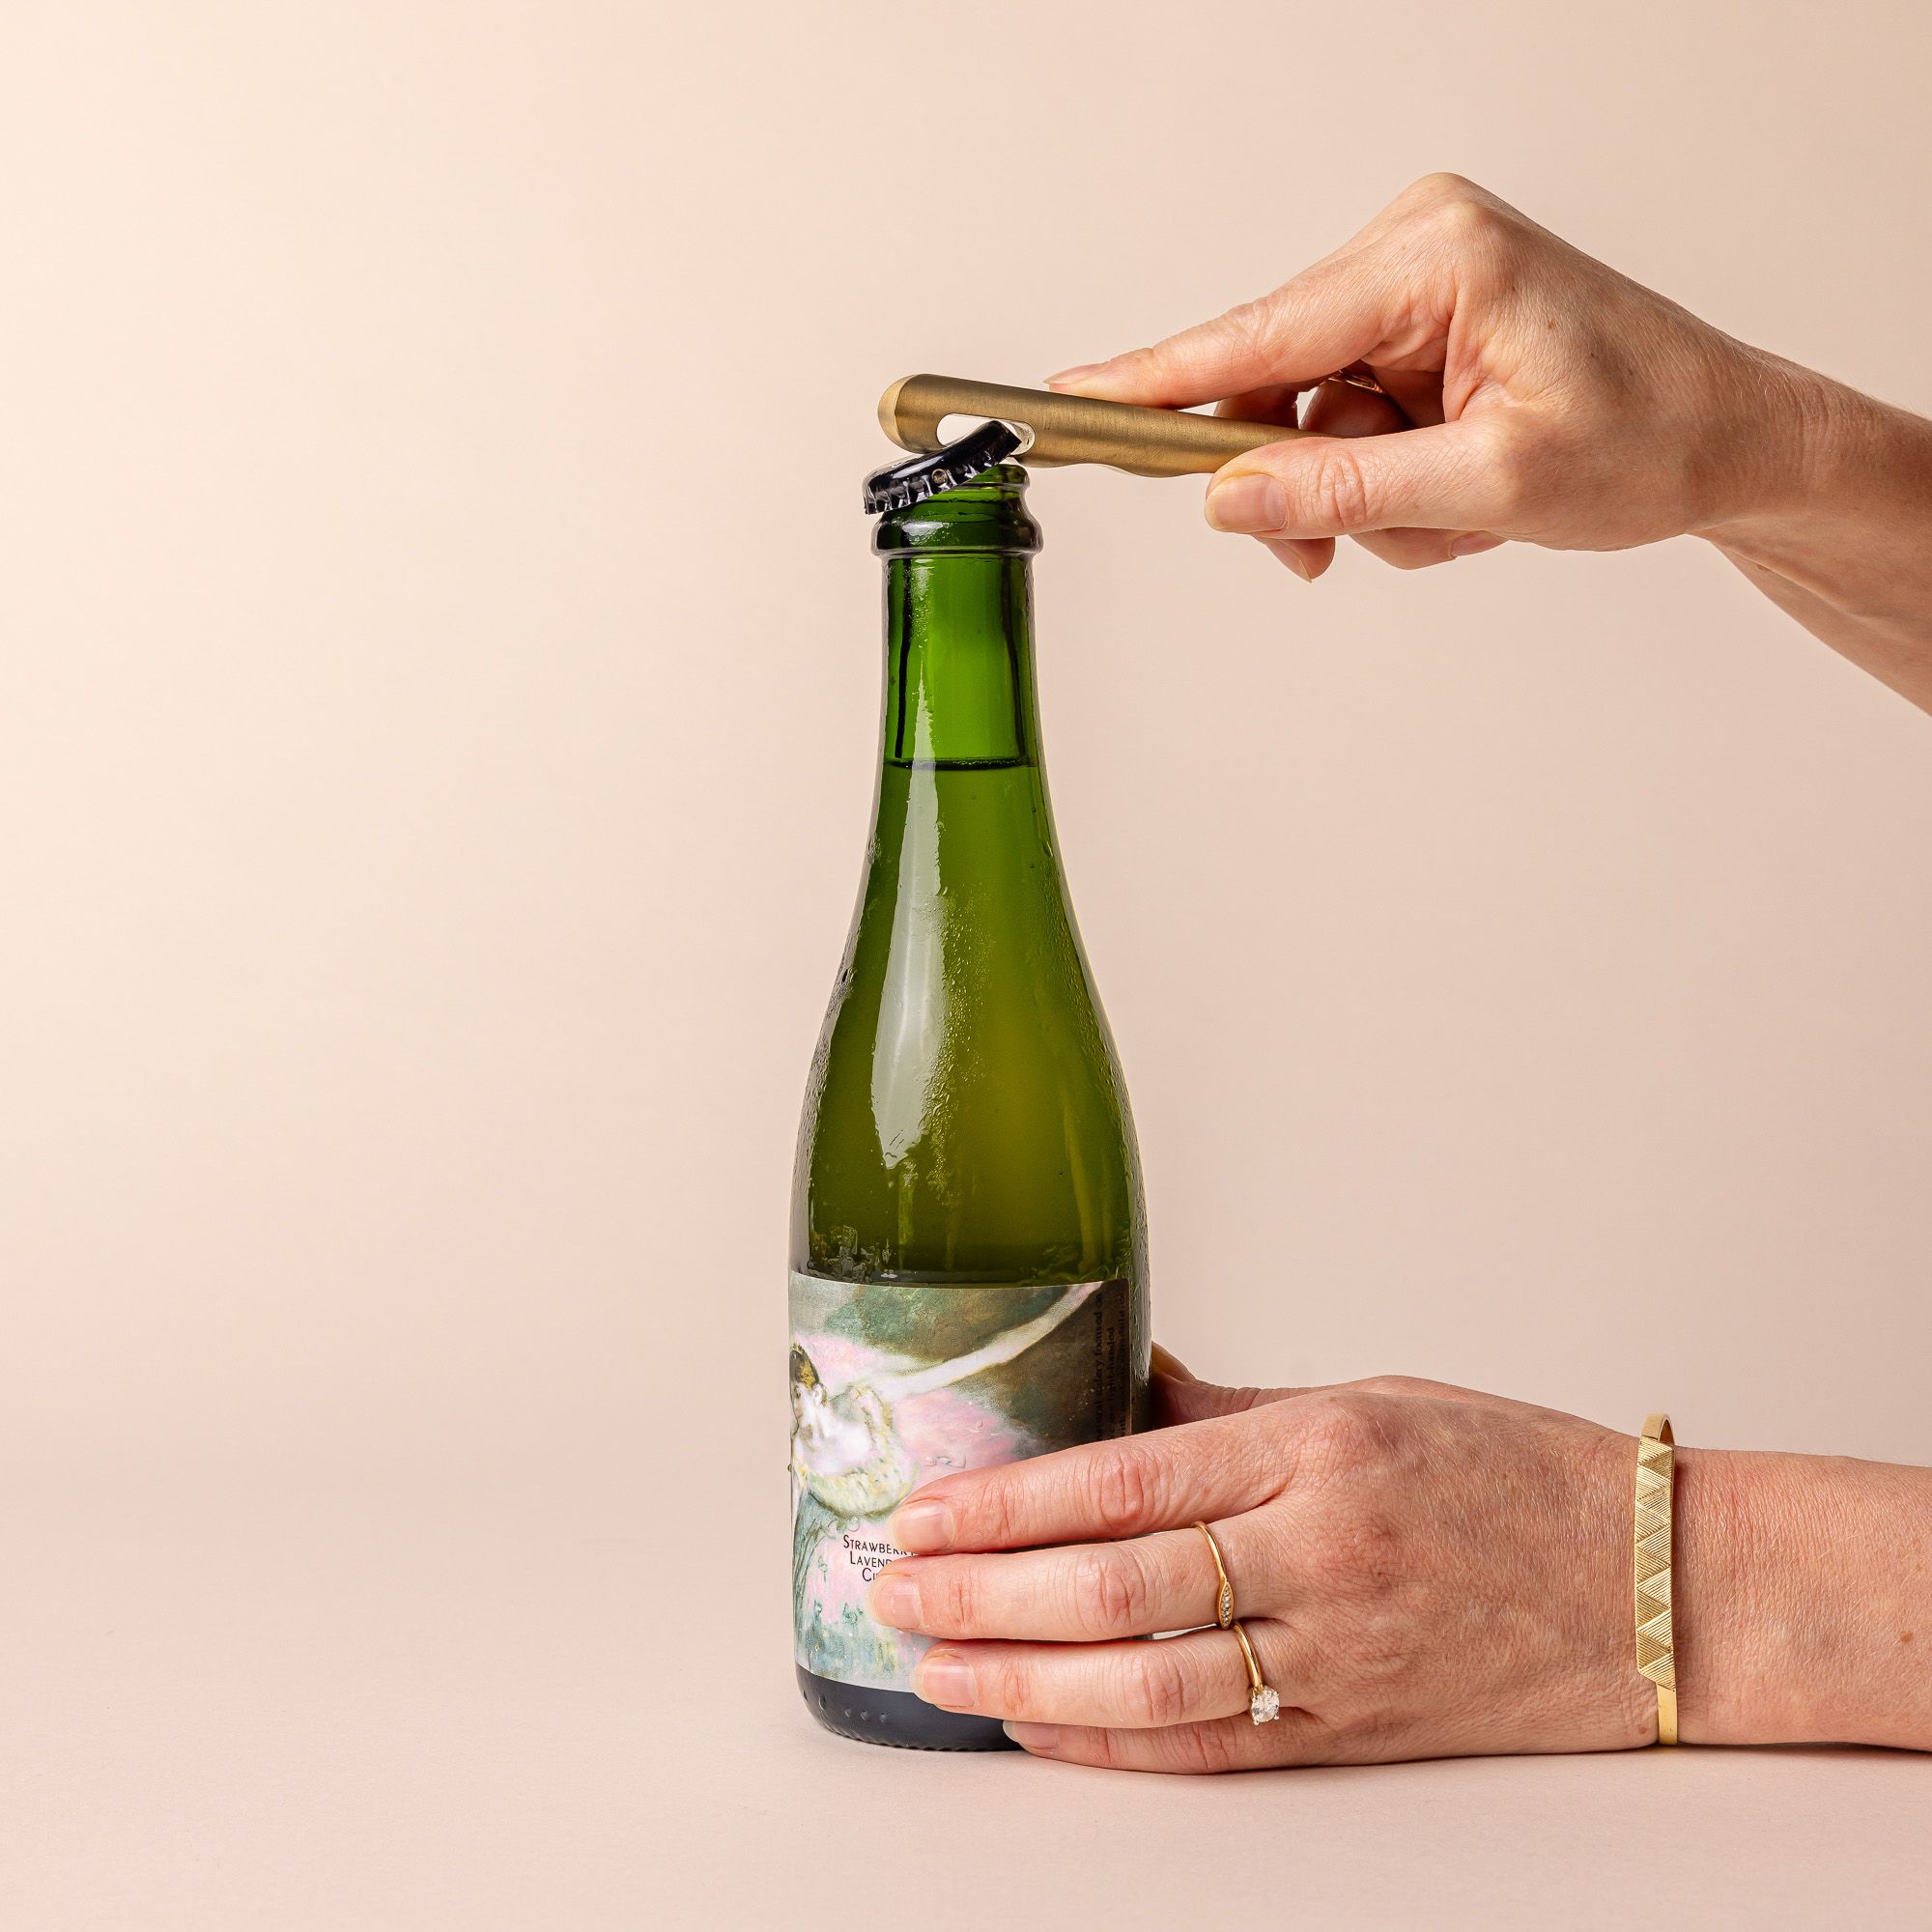 Hands holding a green bottle and a sophisticated brass bottle opener to open it.